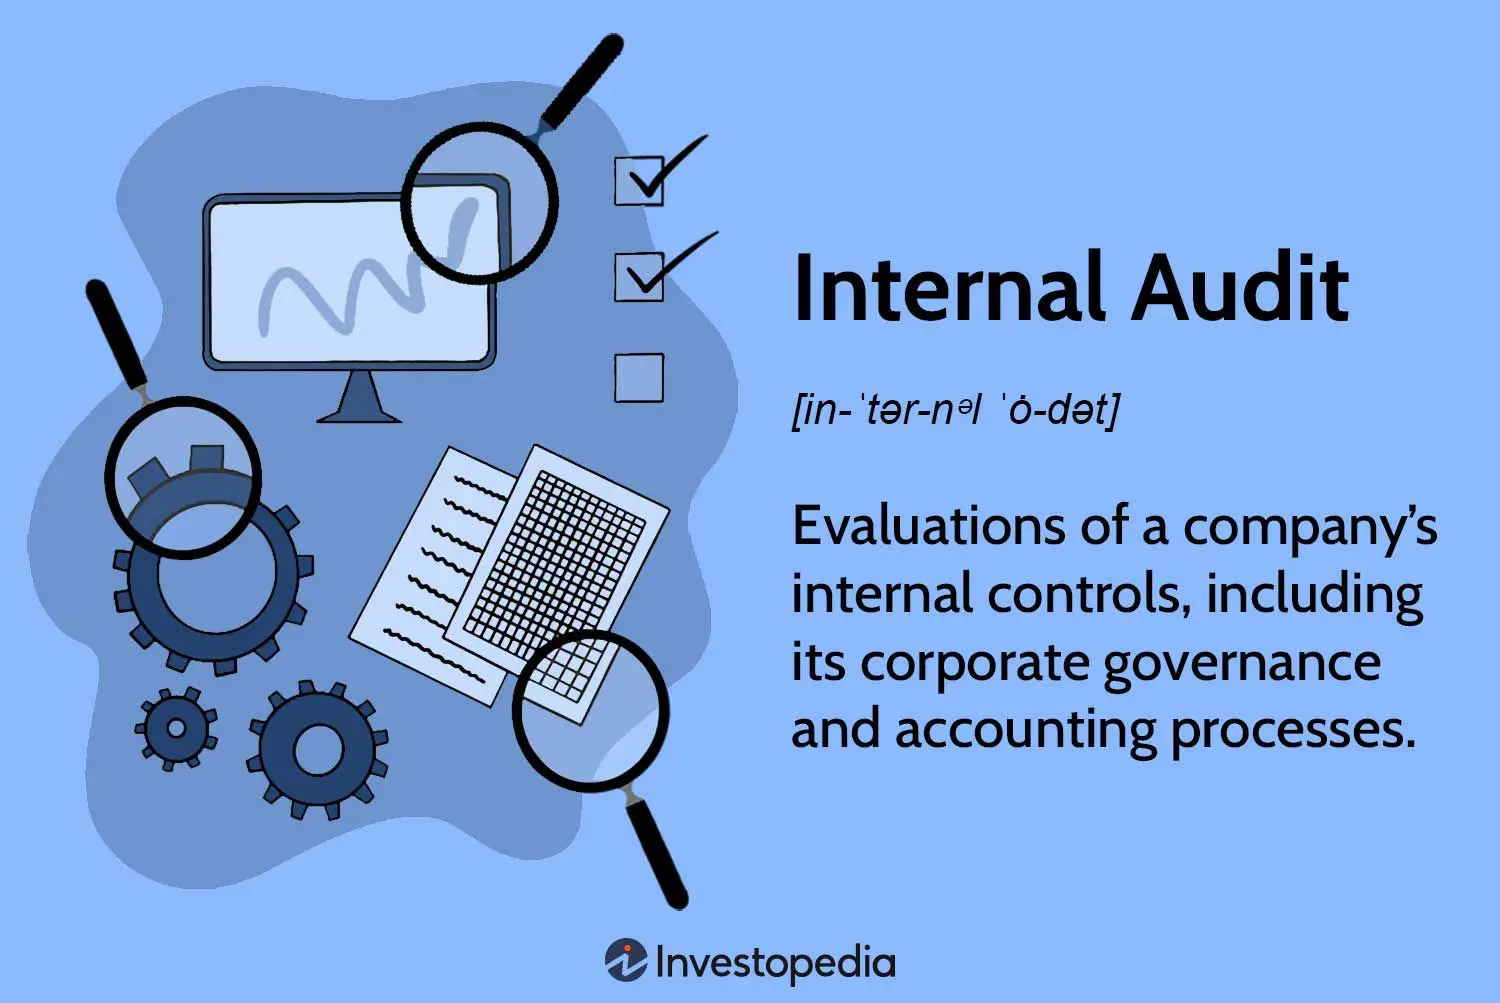 information technology internal auditor - What is the difference between IT auditor and internal auditor